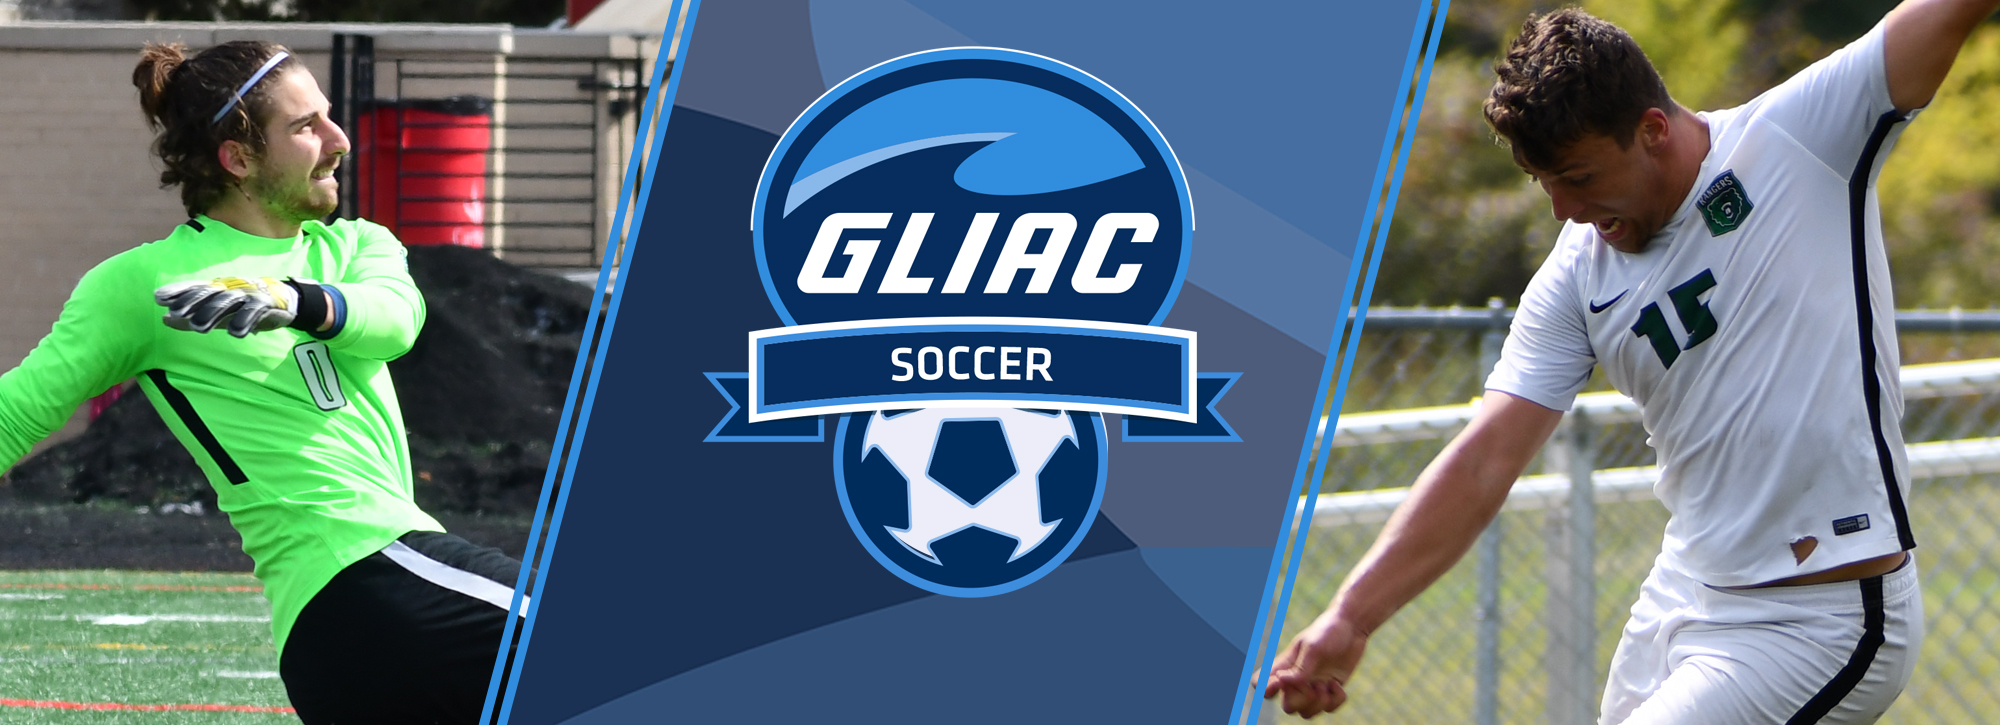 Parkside's Novakovich and Durand sweep men's soccer weekly awards